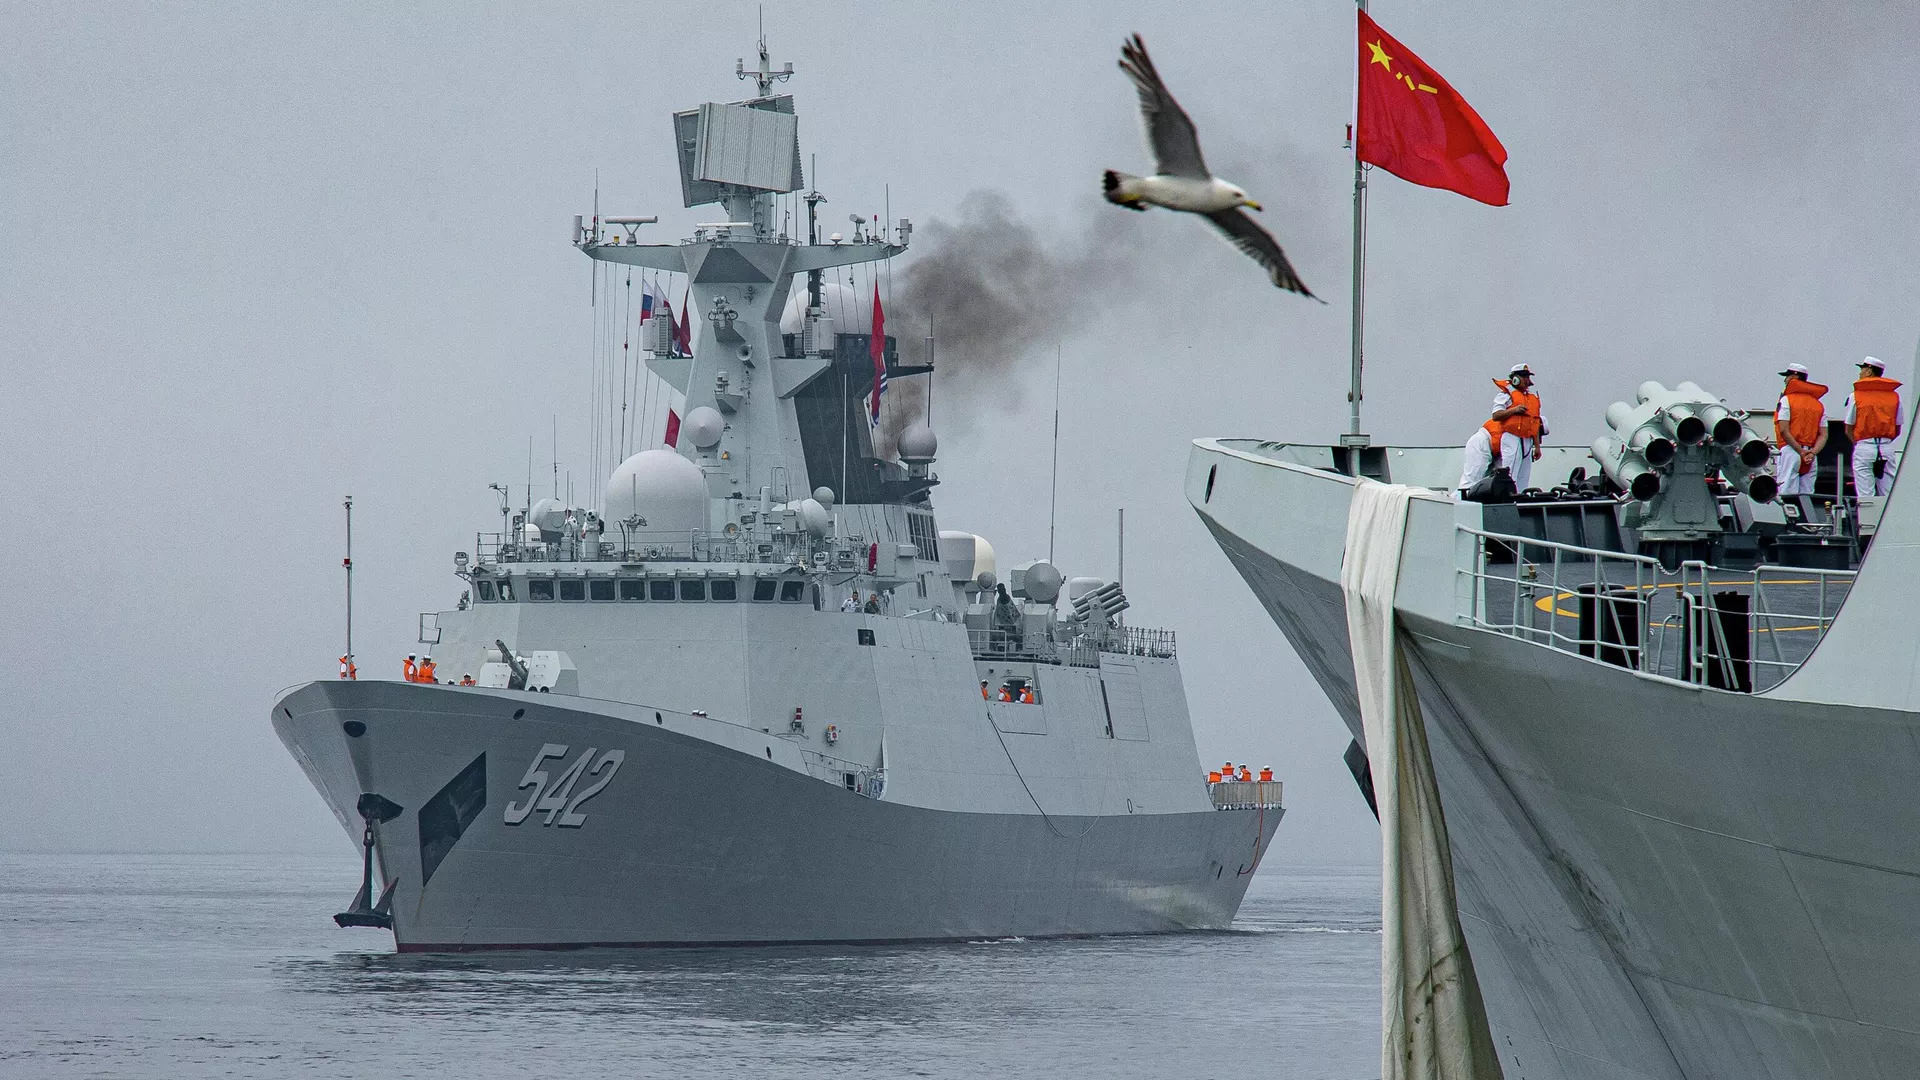 Chinese Navy Ships Arrive in Vladivostok After Joint Russia-China Exercises - Sputnik International, 1920, 14.09.2023